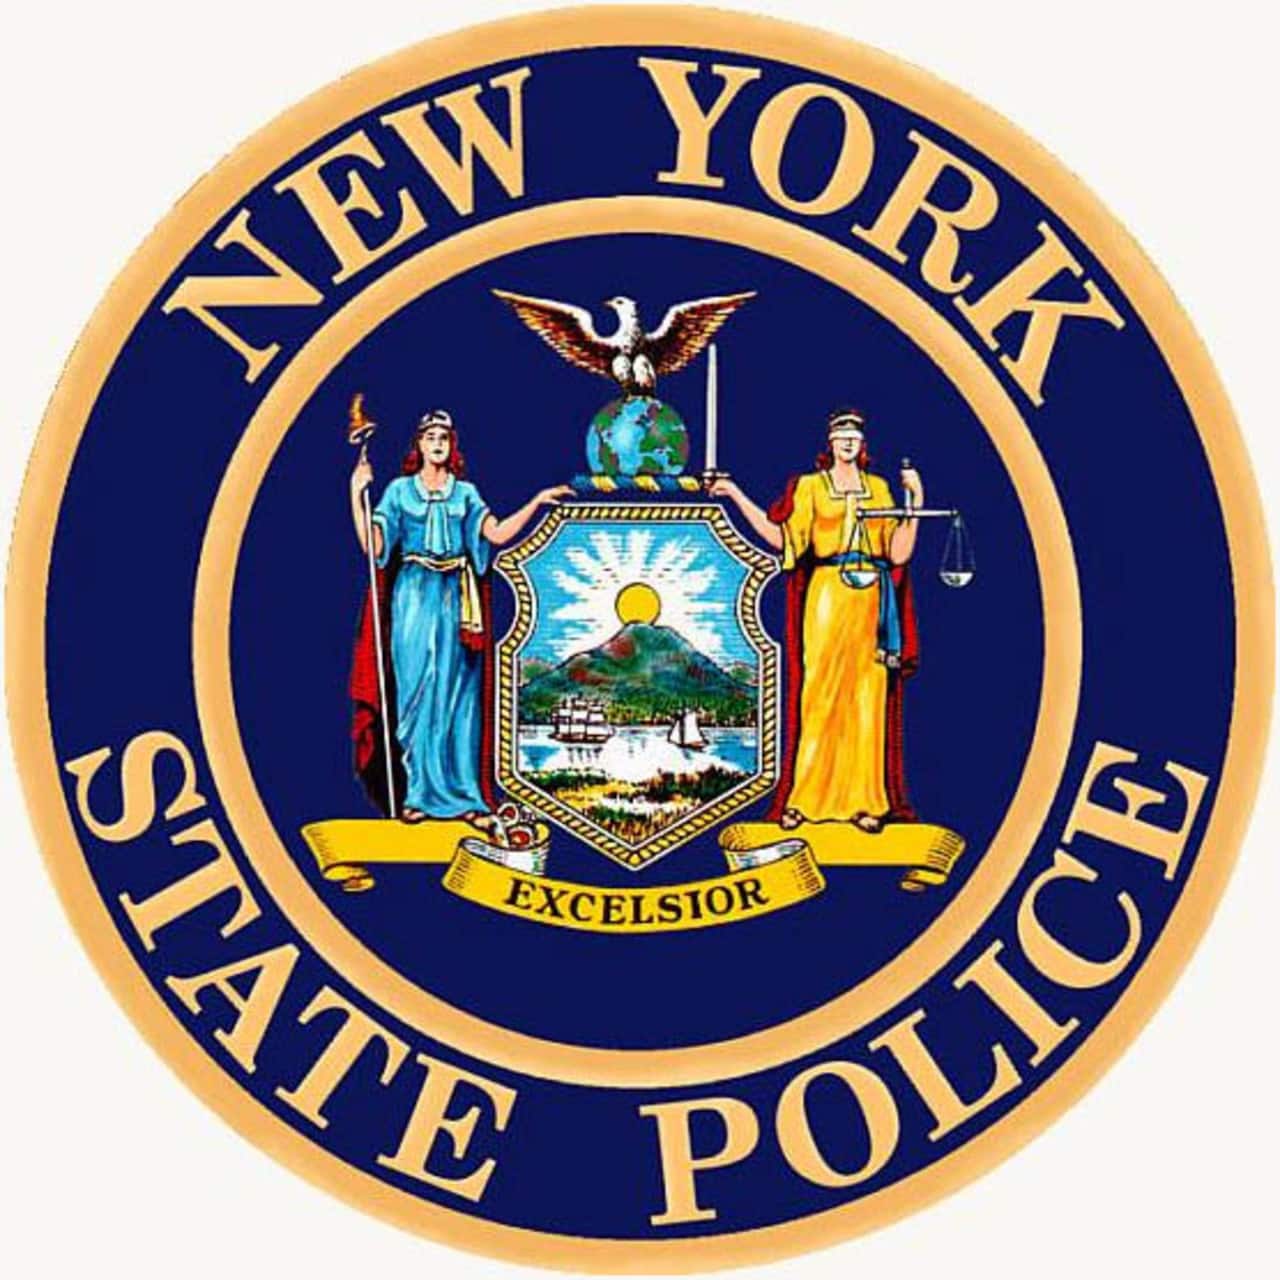 New York State Police seal